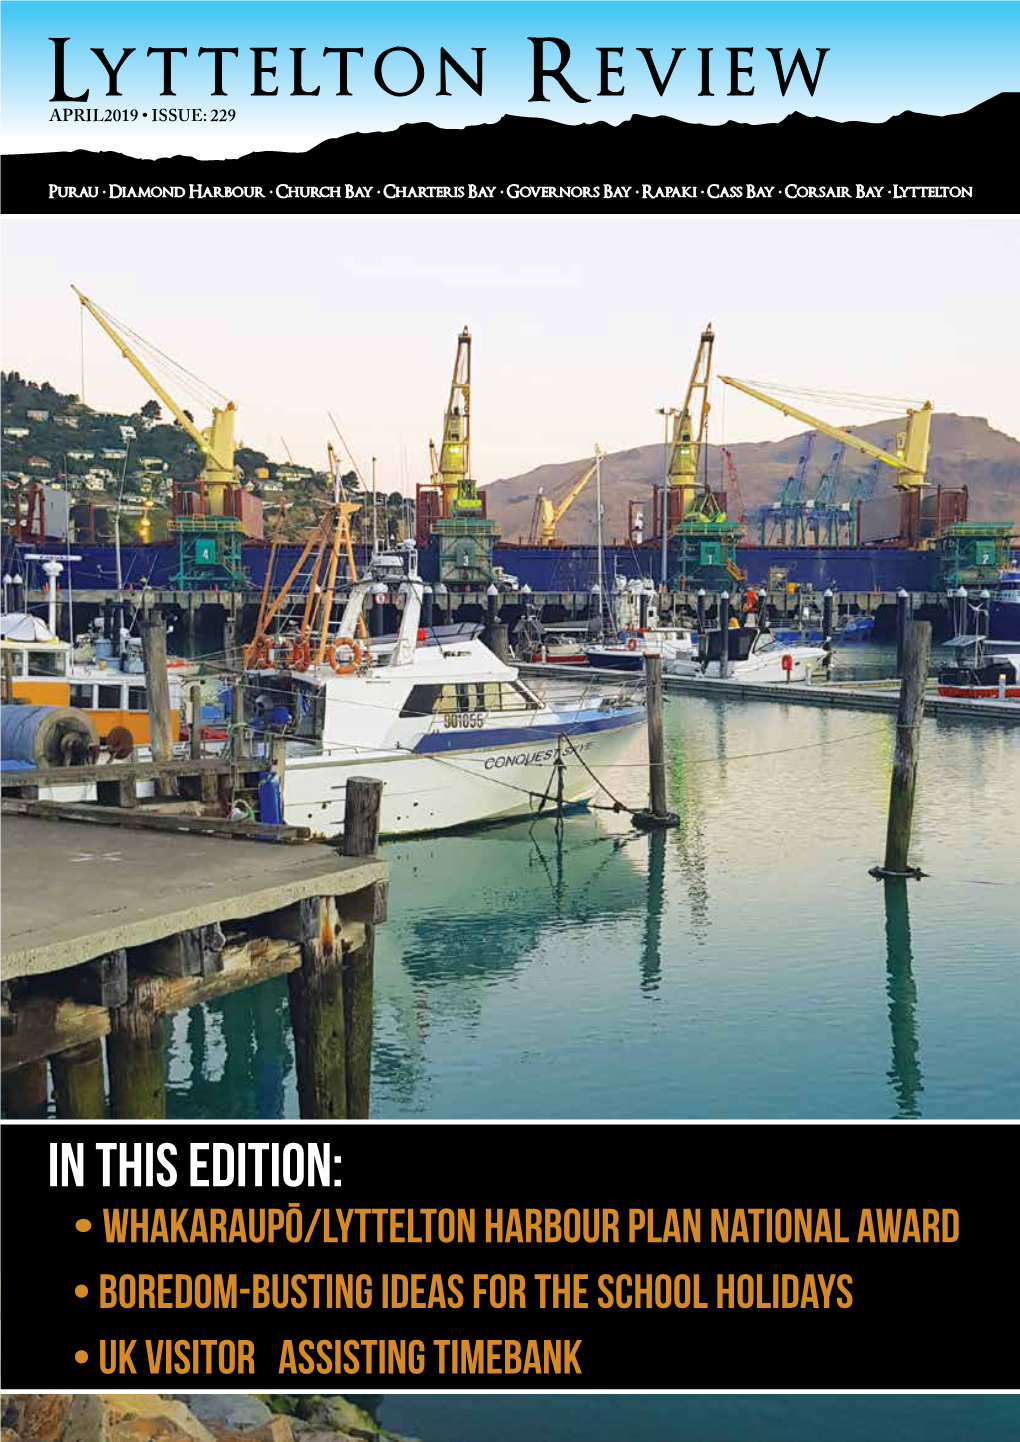 IN THIS EDITION: • Whakaraupō/Lyttelton Harbour Plan National Award • Boredom-Busting Ideas for the School Holidays • UK Visitor ASSISTING TIMEBANK NEWS